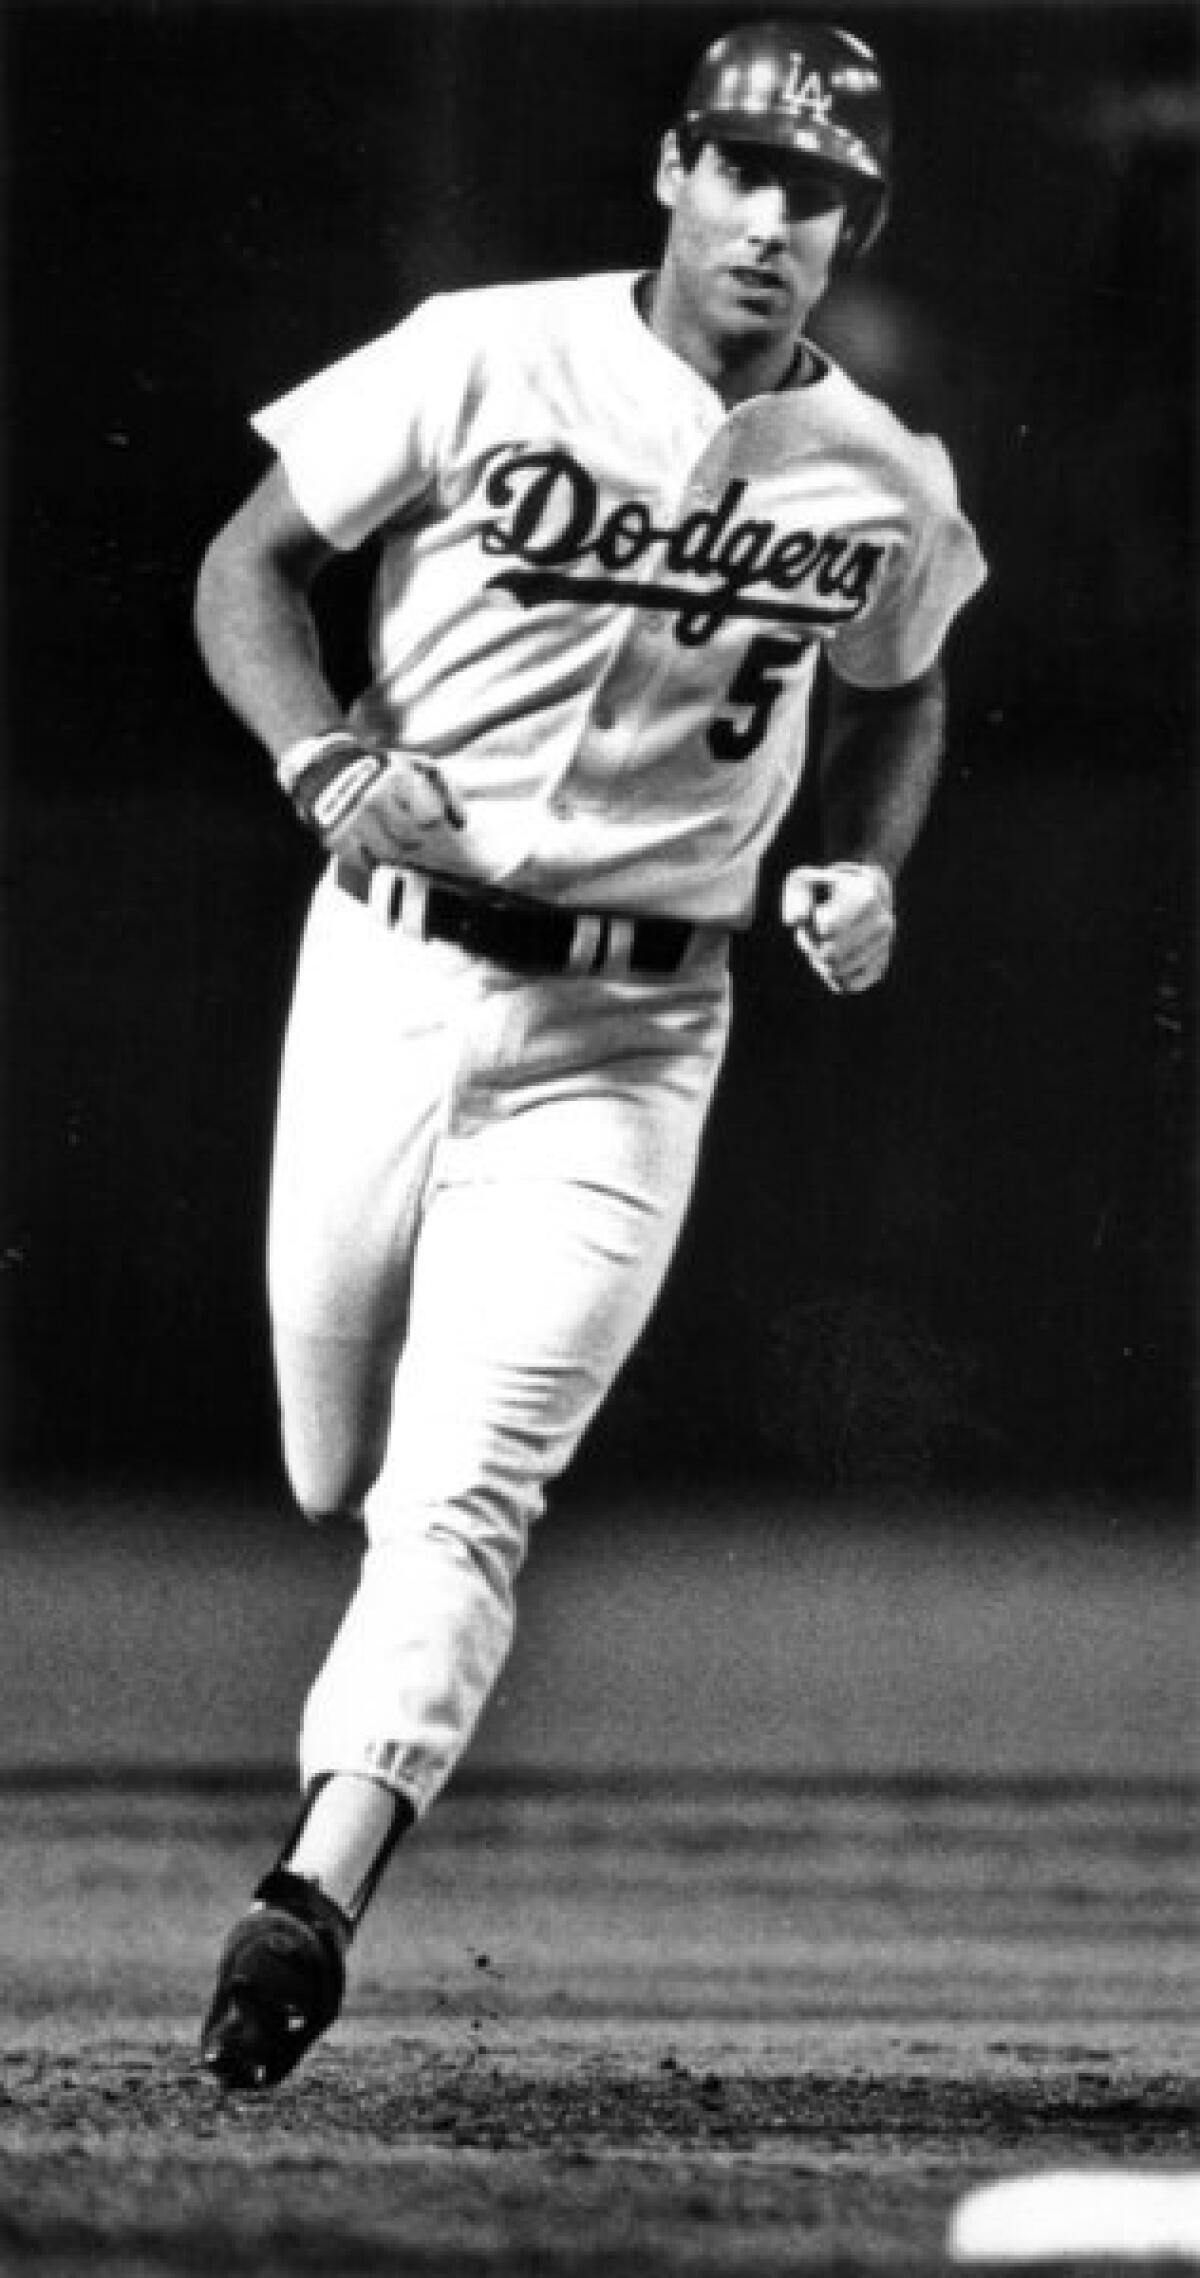 Aug. 30, 1985: Dodgers' Mike Marshall (outfielder/first baseman) rounds second base after hitting 2nd inning homerun.